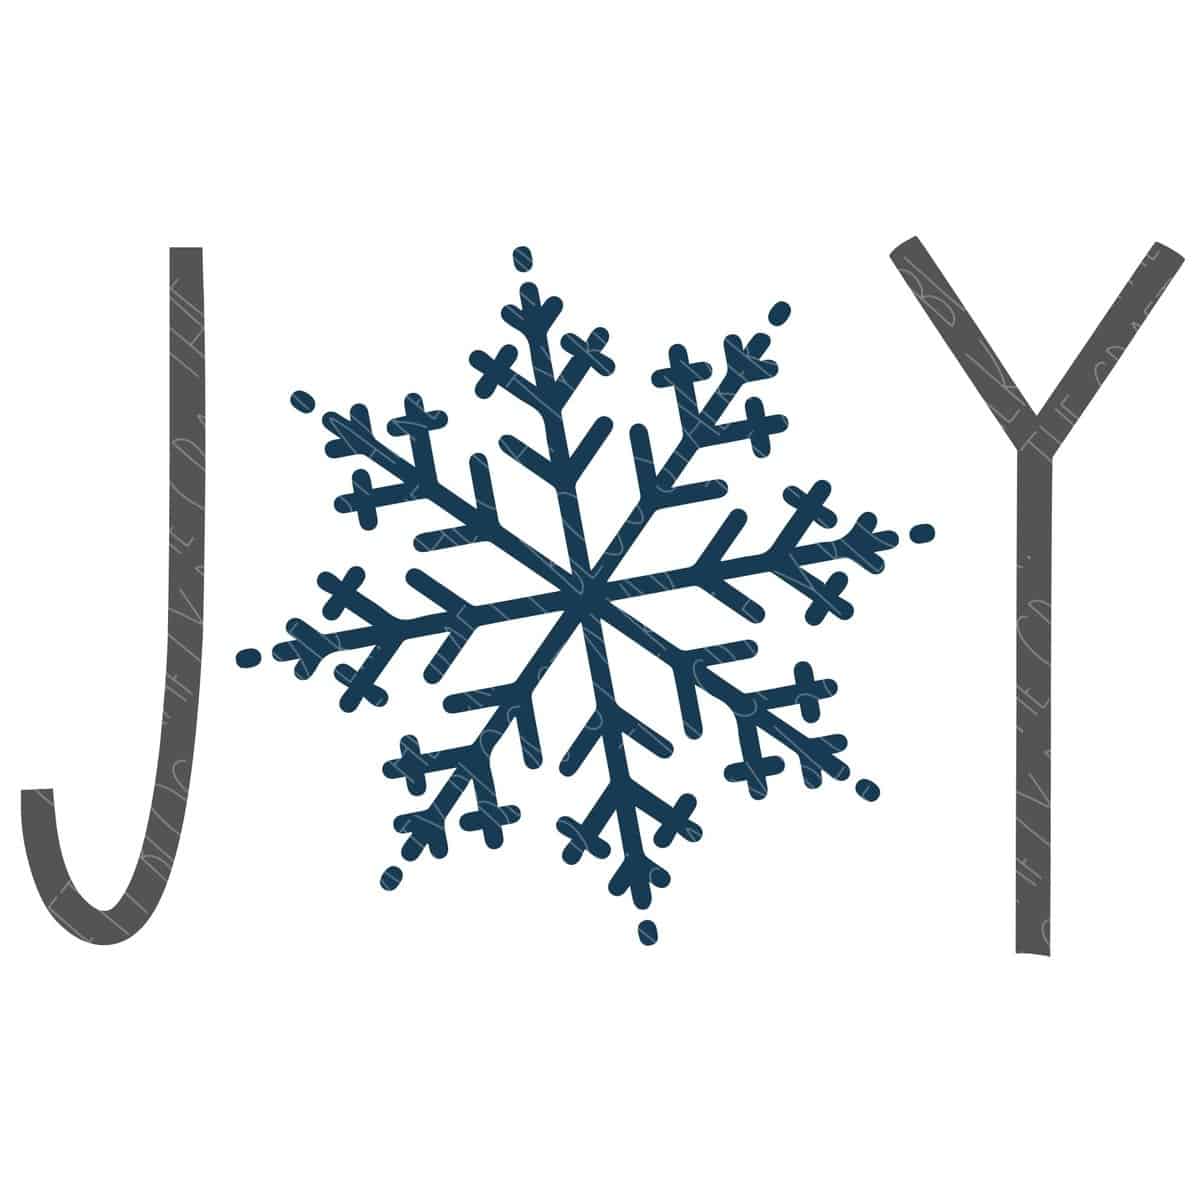 Snowflake Joy SVG	

			
		
	

		
			$3.00 – Buy Now Checkout
							
					
						
							
						
						Added to cart